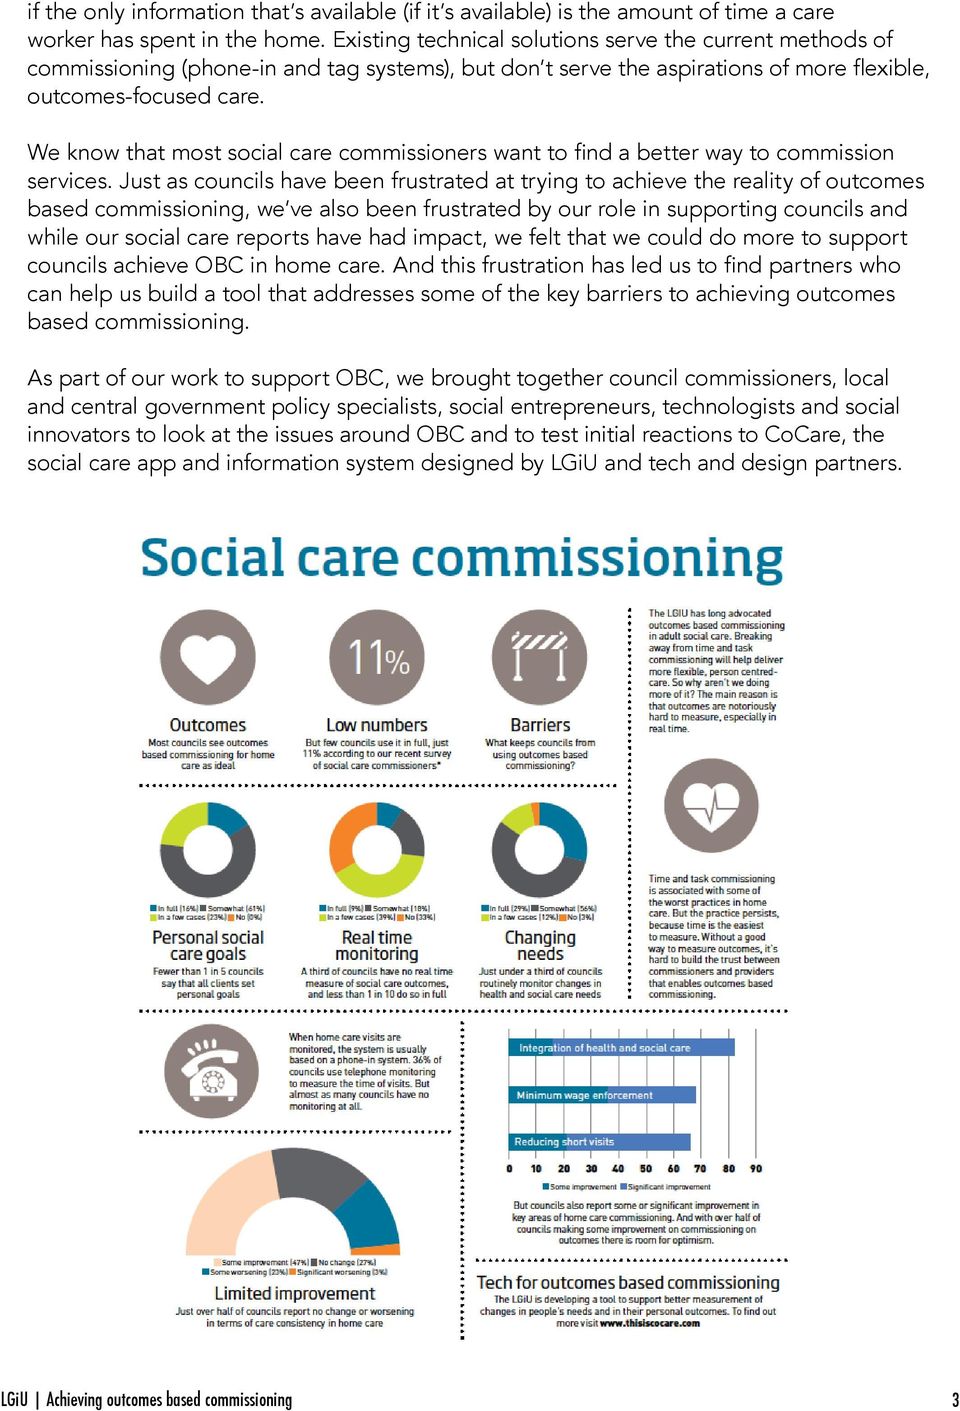 We know that most social care commissioners want to find a better way to commission services.